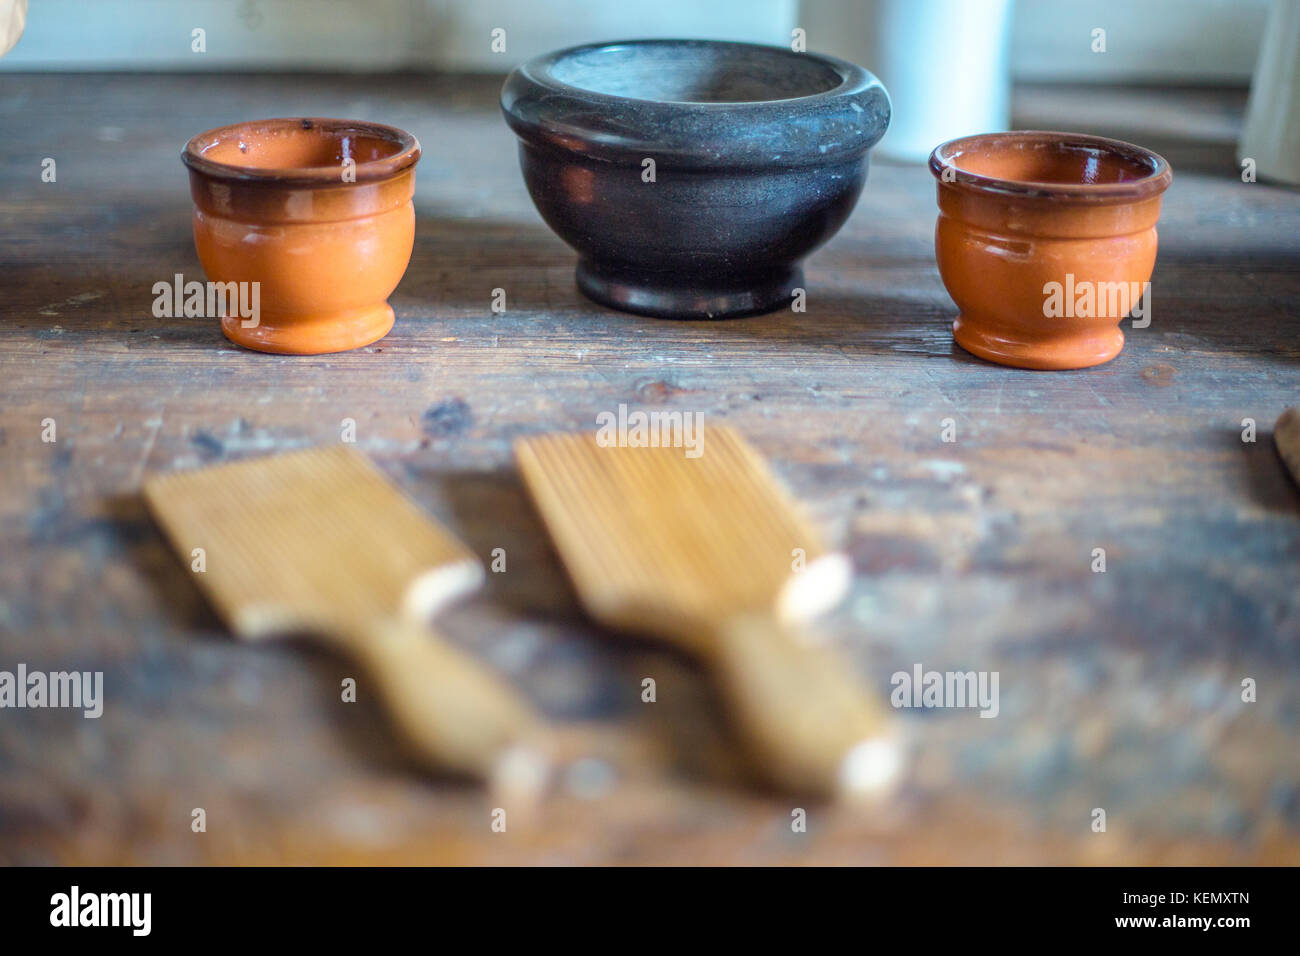 Kitchen table with tree bowls and two spatulas Stock Photo